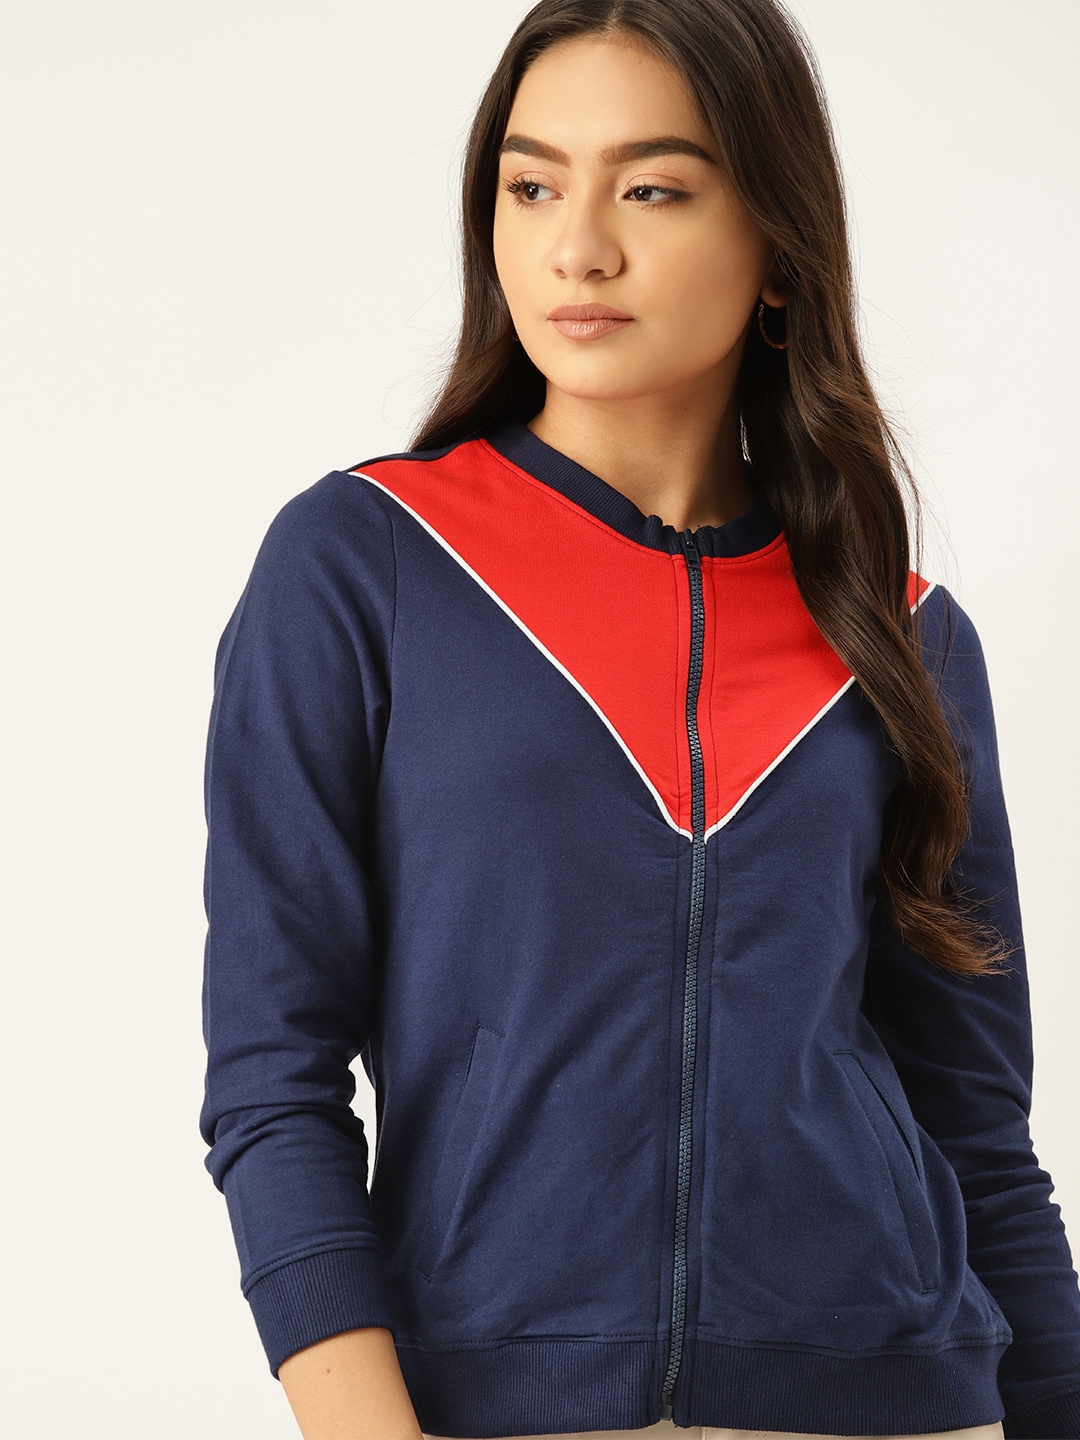 DressBerry Women Navy Blue & Red Pure Cotton Colourblocked Sweatshirt Price in India